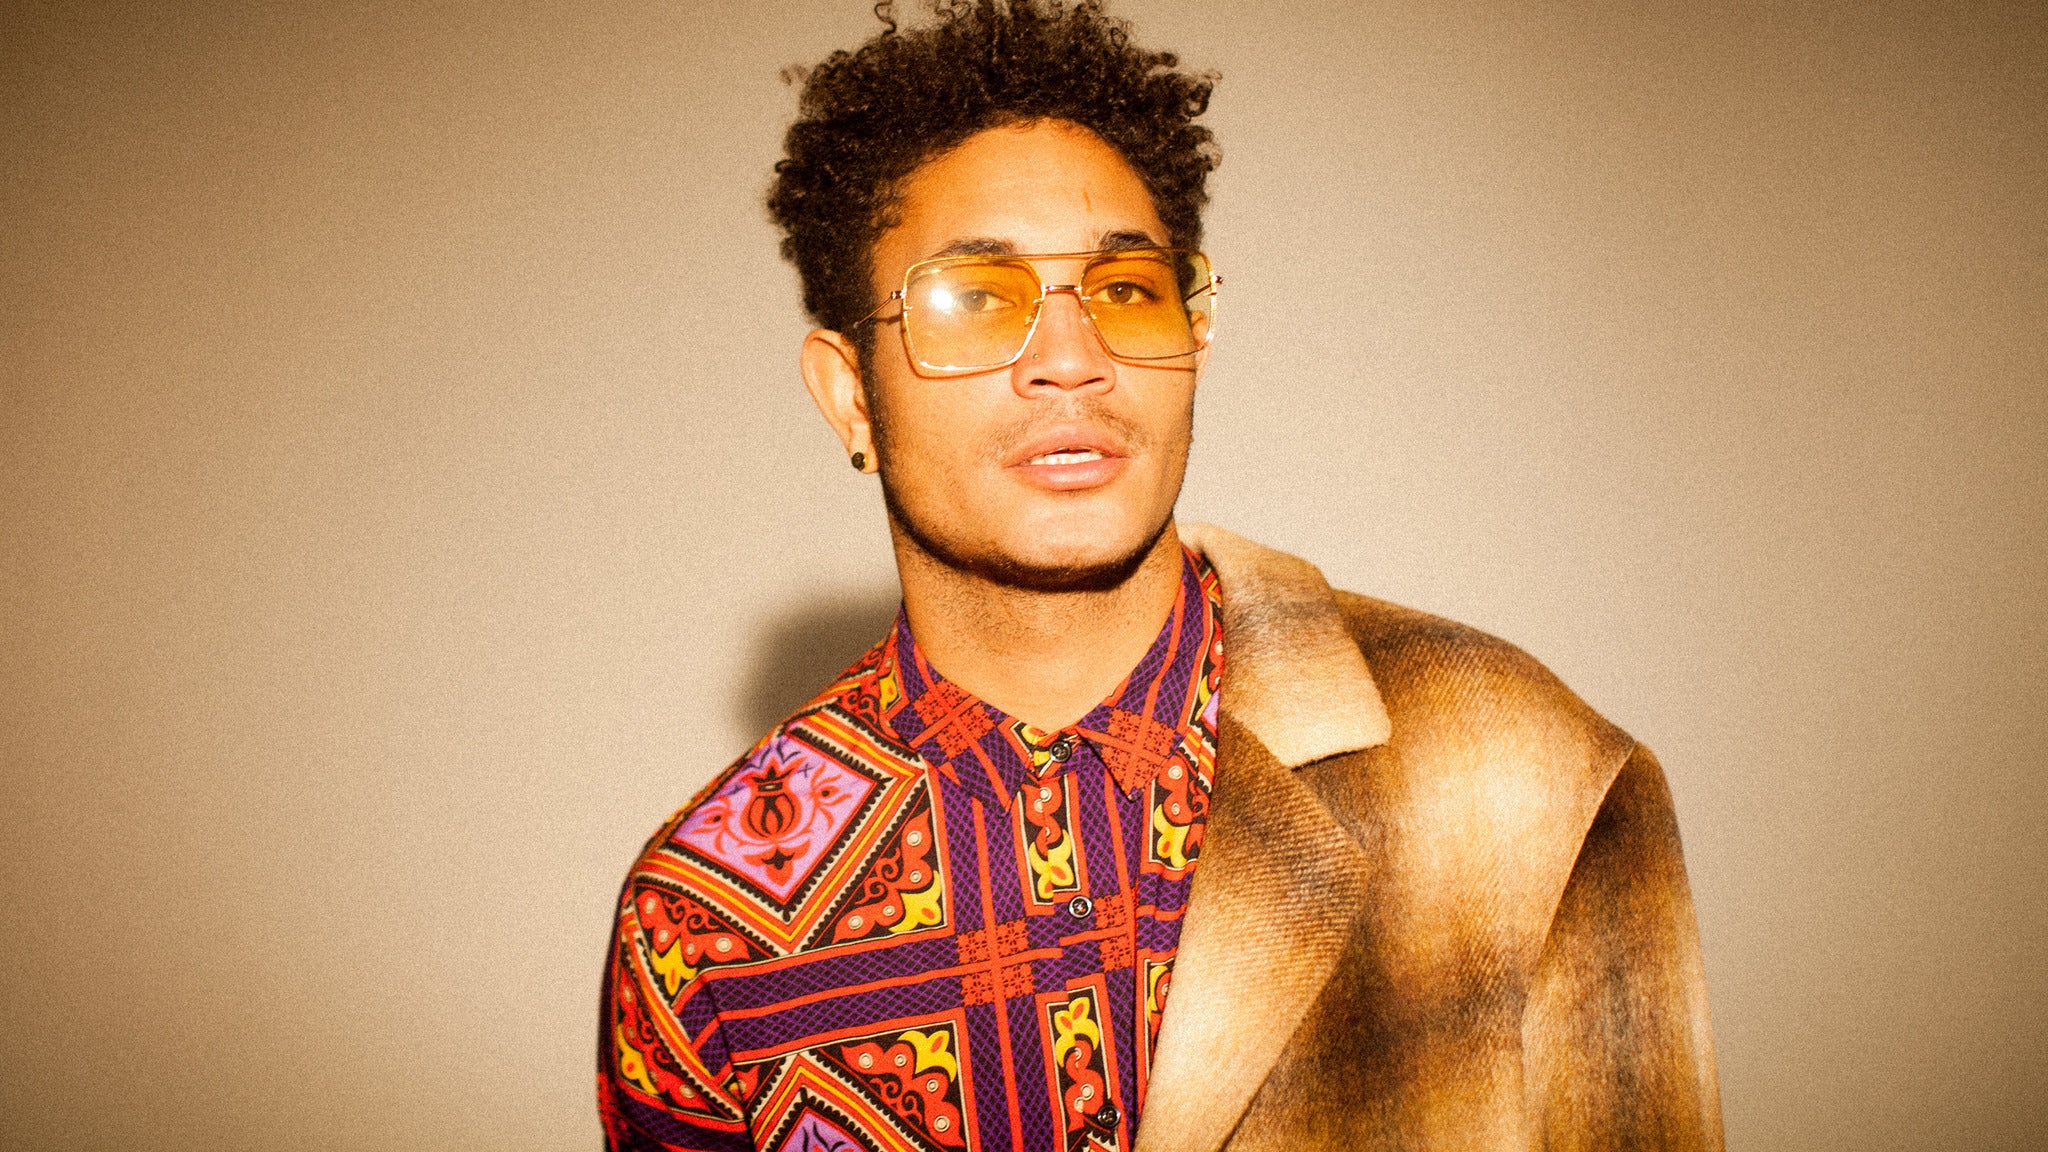 Bryce Vine in Indianapolis promo photo for Live Nation / Old National presale offer code